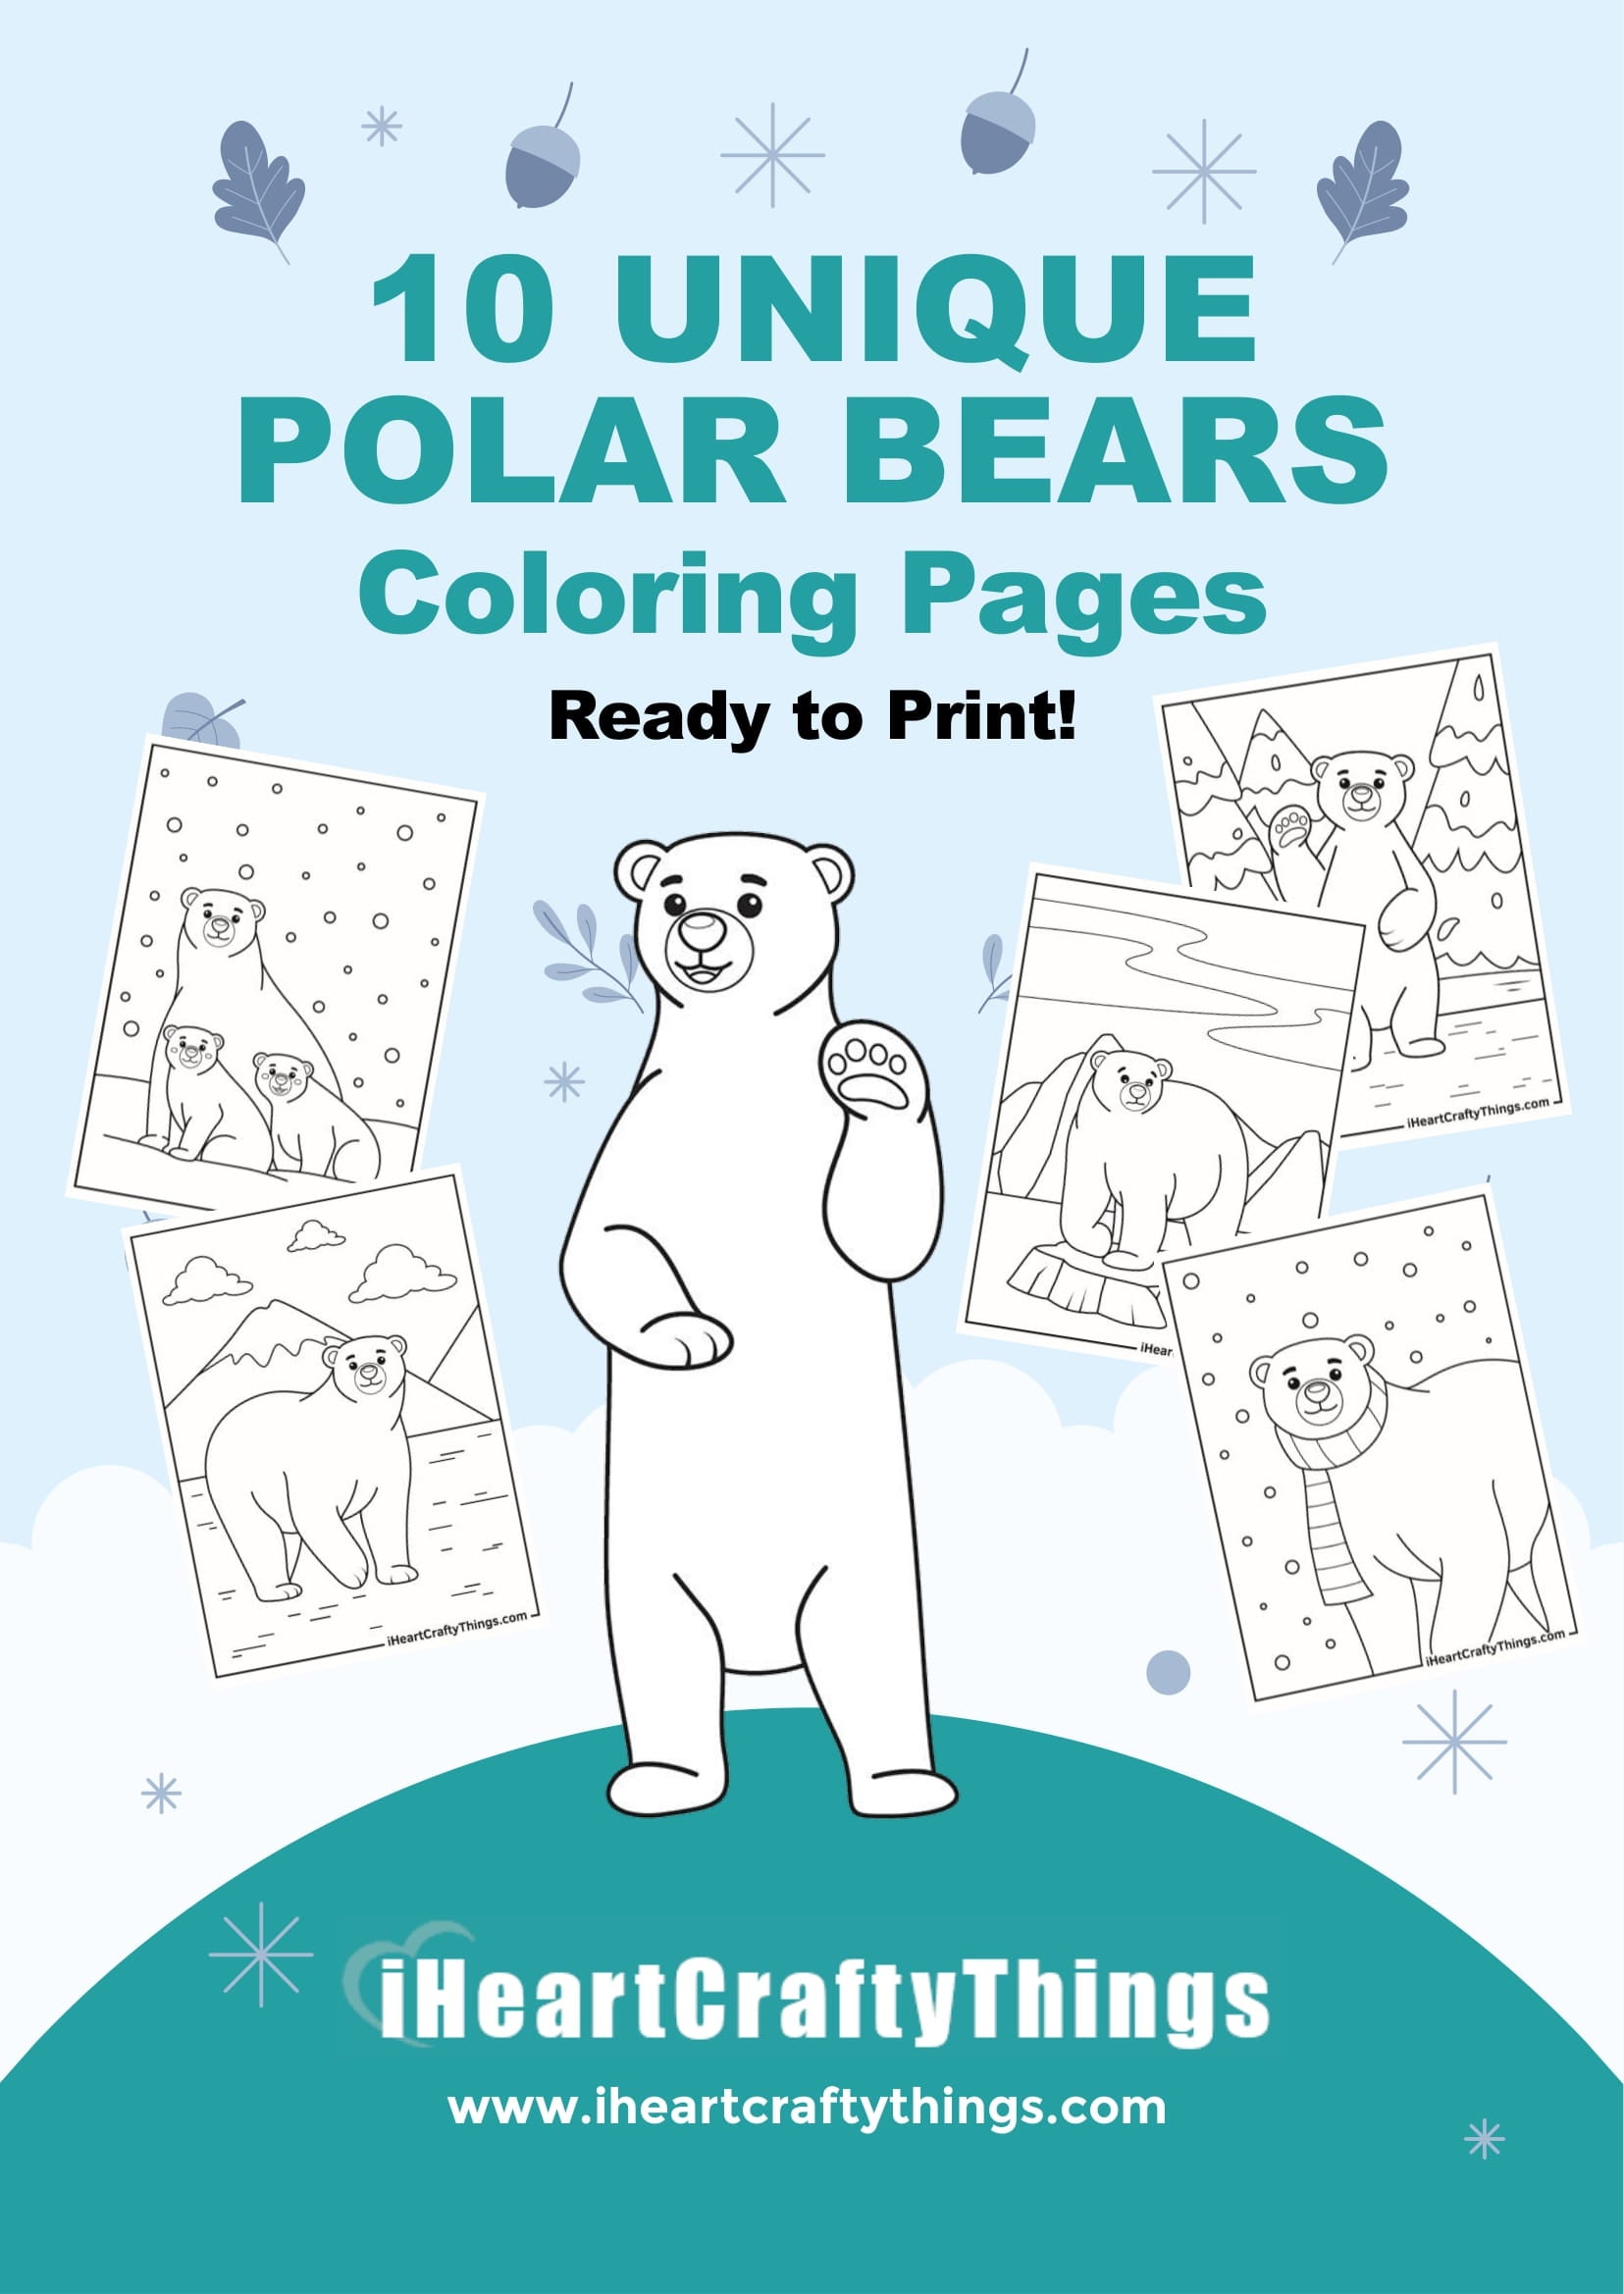 Polar bear coloring pages â i heart crafty things